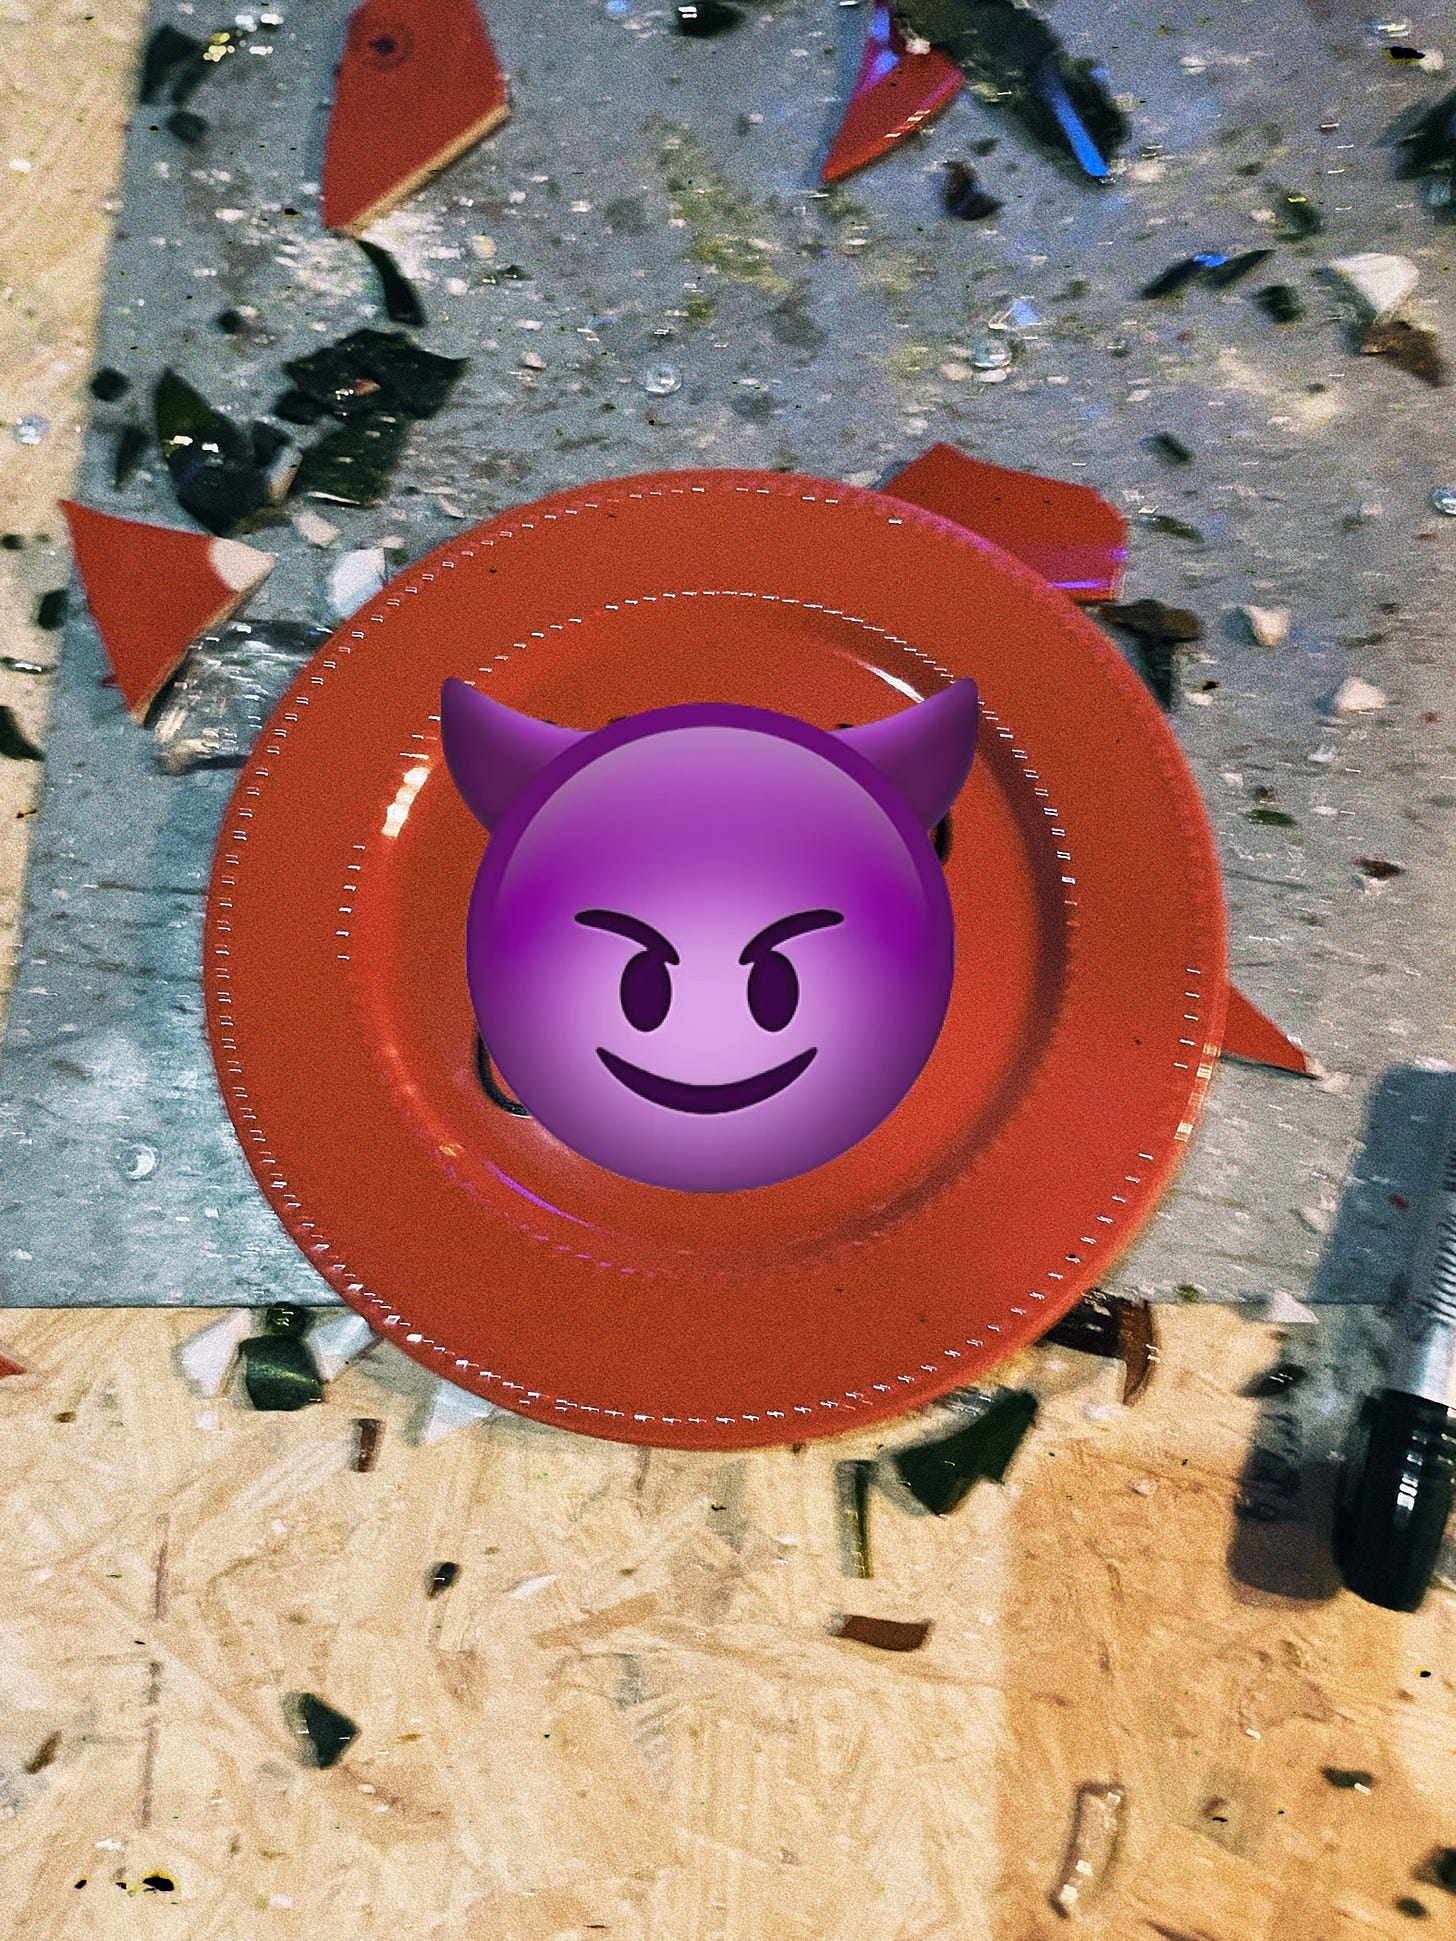 A red ceramic plate is centered in a somewhat blurry photo with a filter. There is a purple devil emoji smiling threateningly obscuring the actual names written on the plate. Surrounding the plate are the shards of previously shattered glass objects including another plate, beer bottles, and a clear vase.